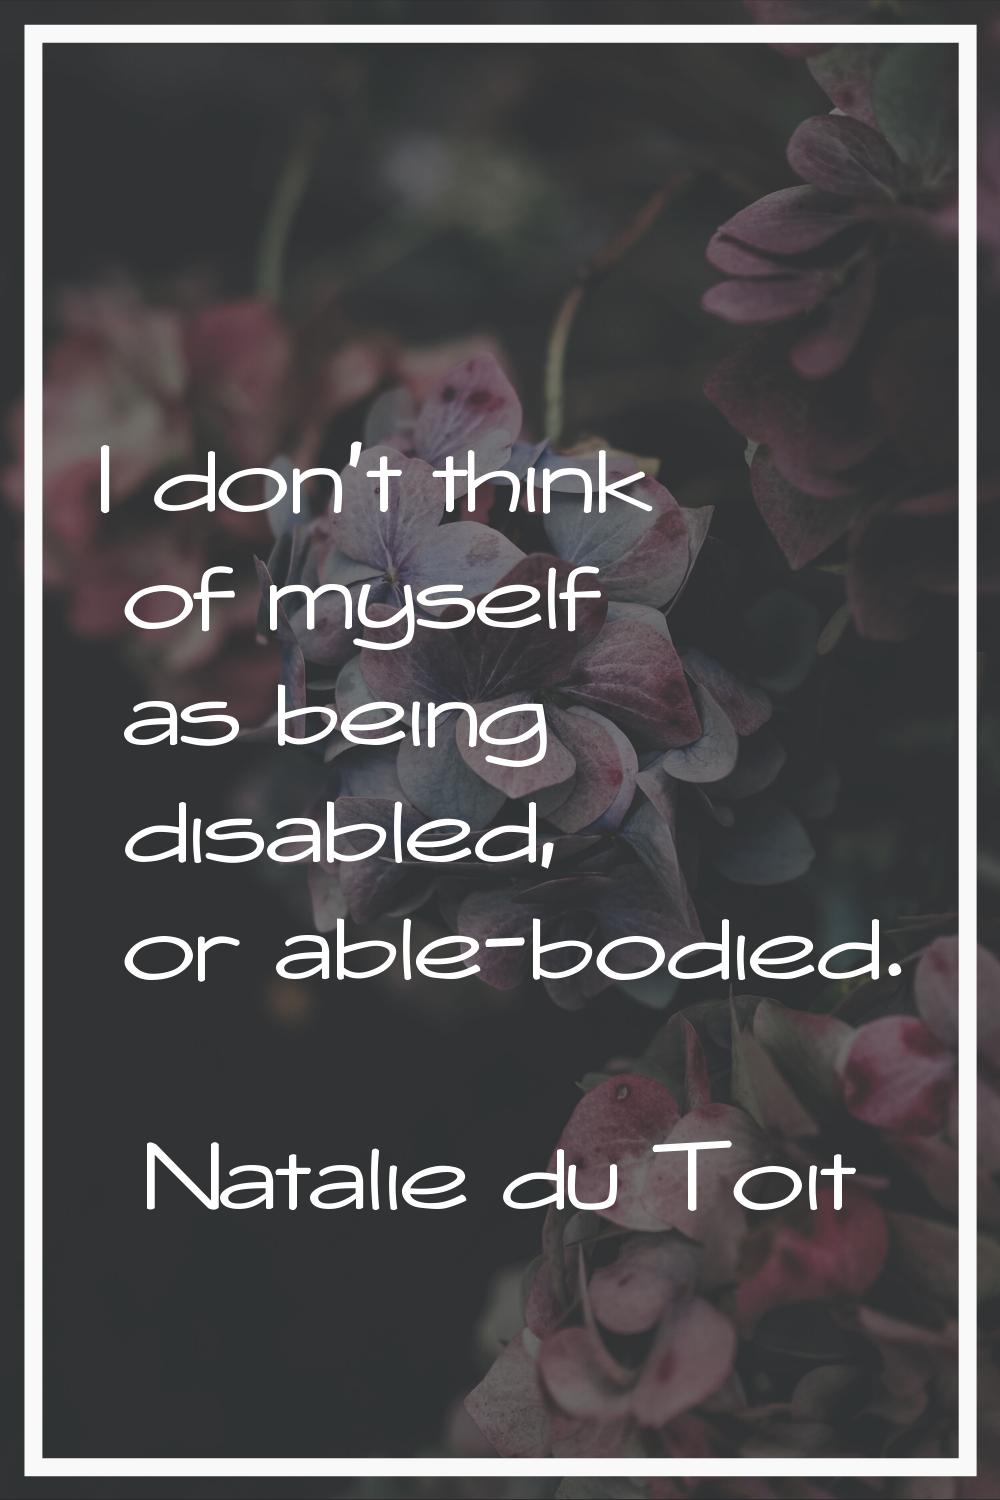 I don't think of myself as being disabled, or able-bodied.